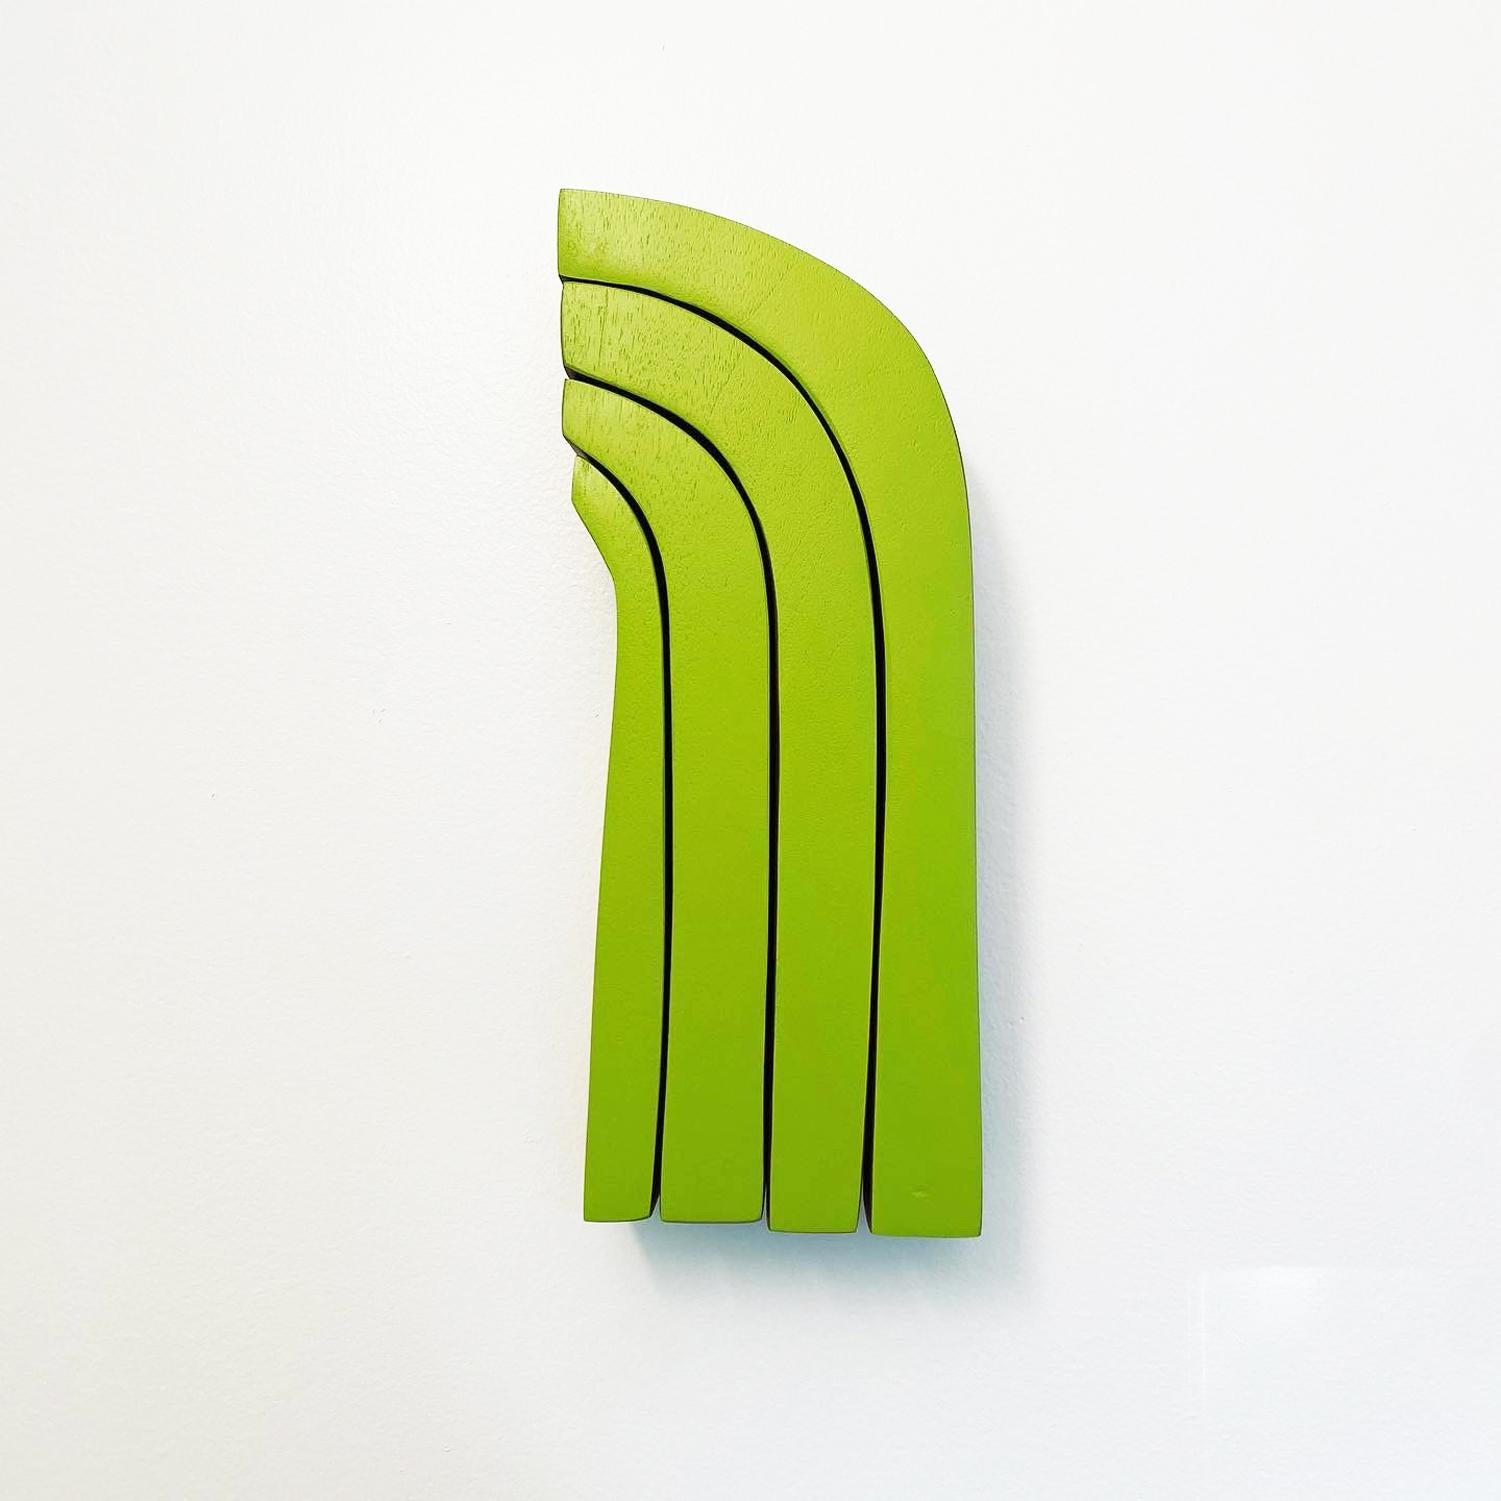 Artwork made with spray acrylic on solid walnut satin finish

Small Pop series are minimalist driven, wood wall sculptures that are small and blocky and feature bright saturated colors. The pieces was inspired by my love for simple bold colors and